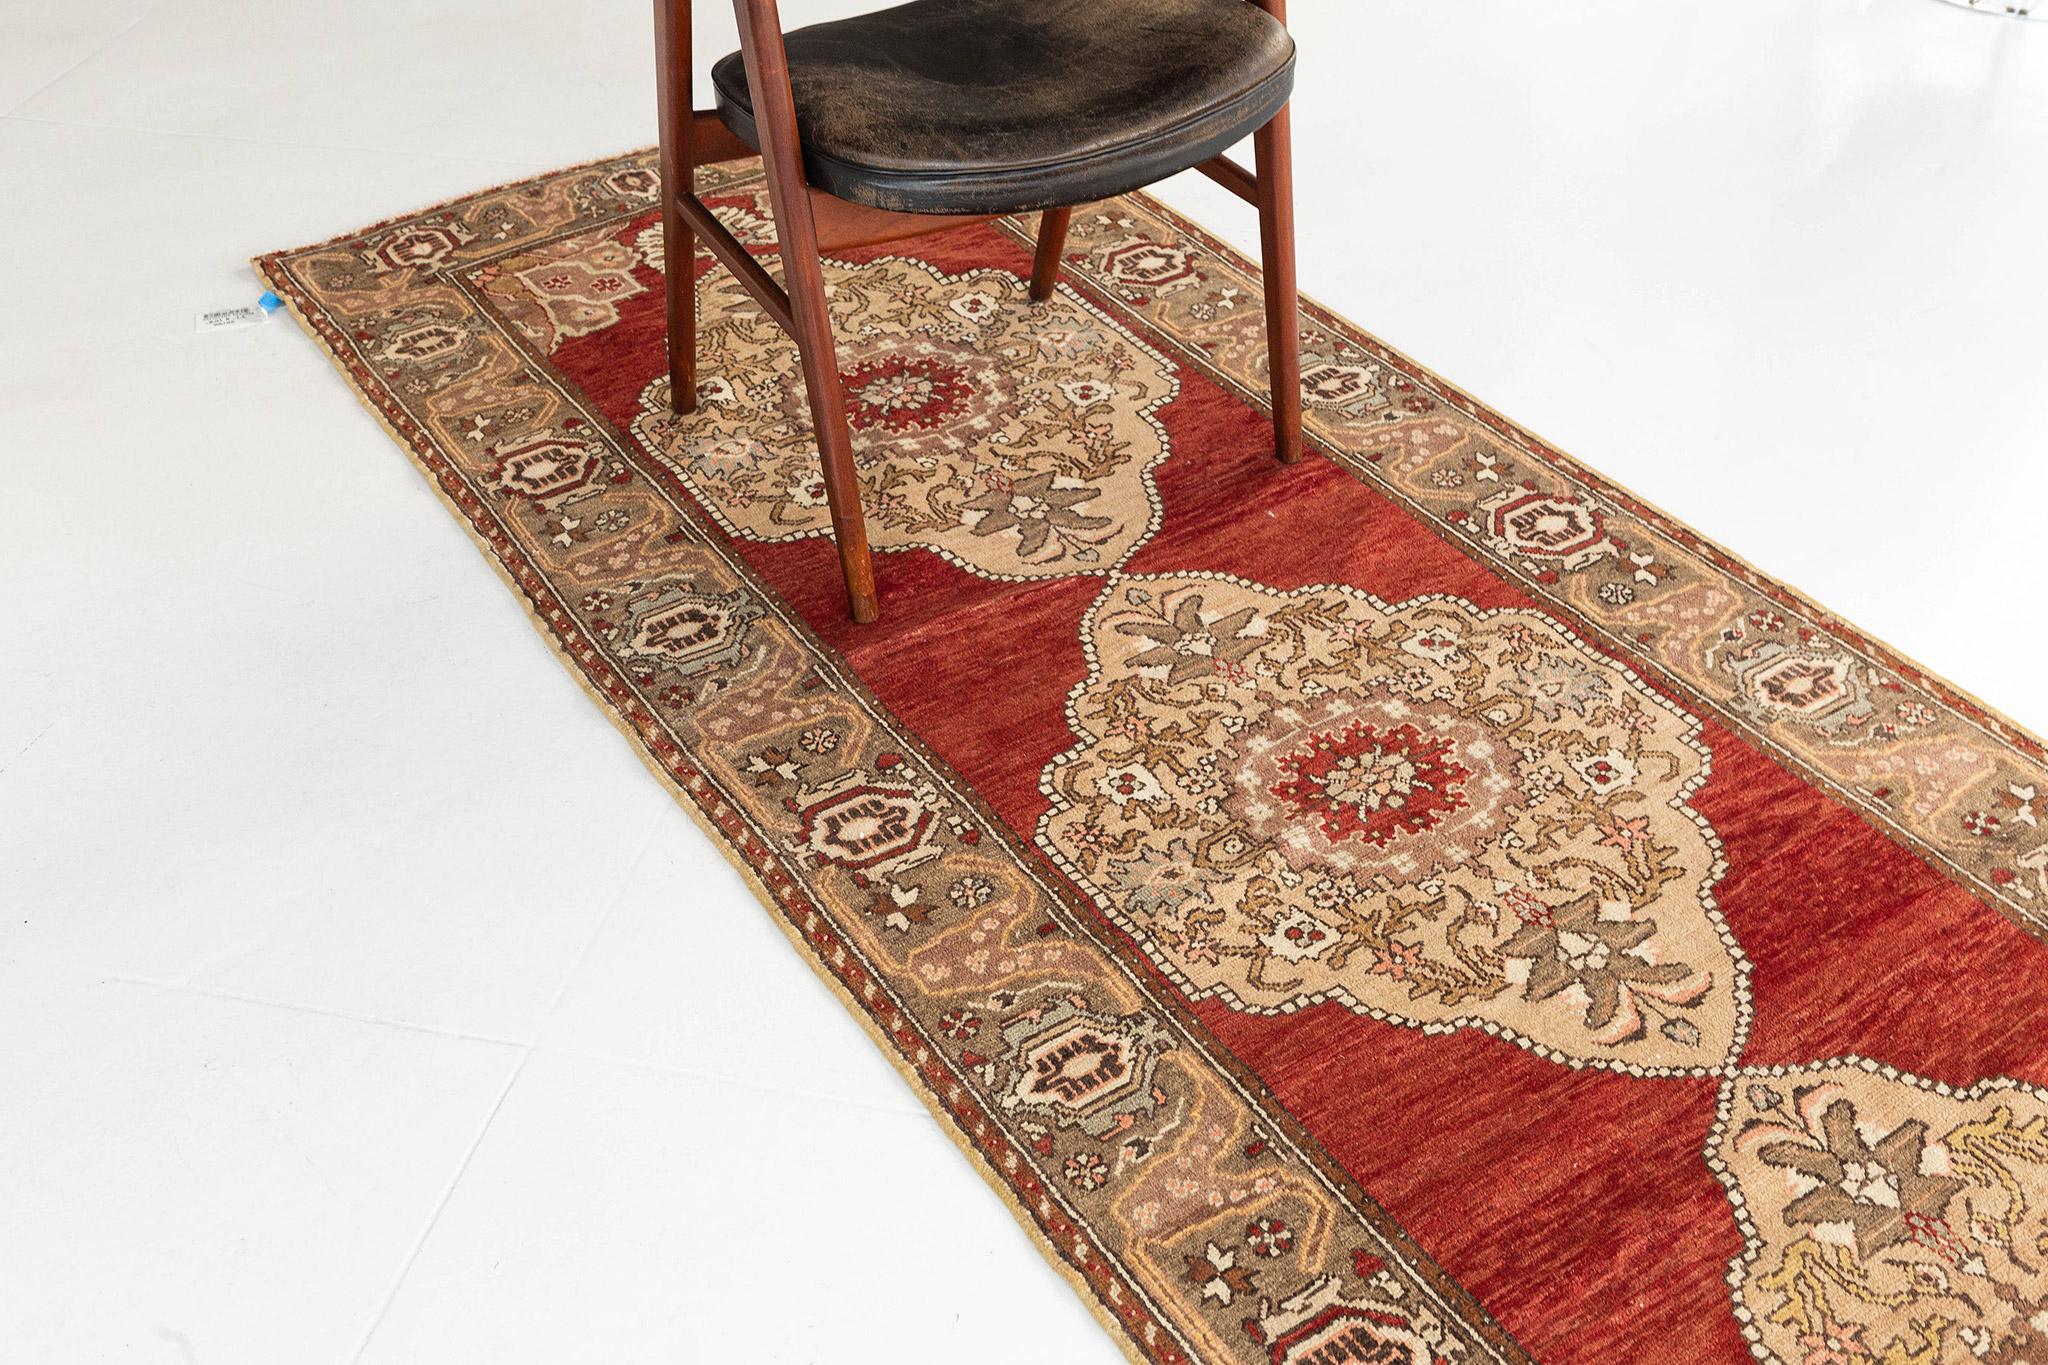 A Vintage Turkish Anatolian runner that features a scalloped diamond-shaped medallions with palmette pendants floating in the center of an abrashed teracotta field. Delicate florid elements adorn the medallion and corner spandrels with a lovely